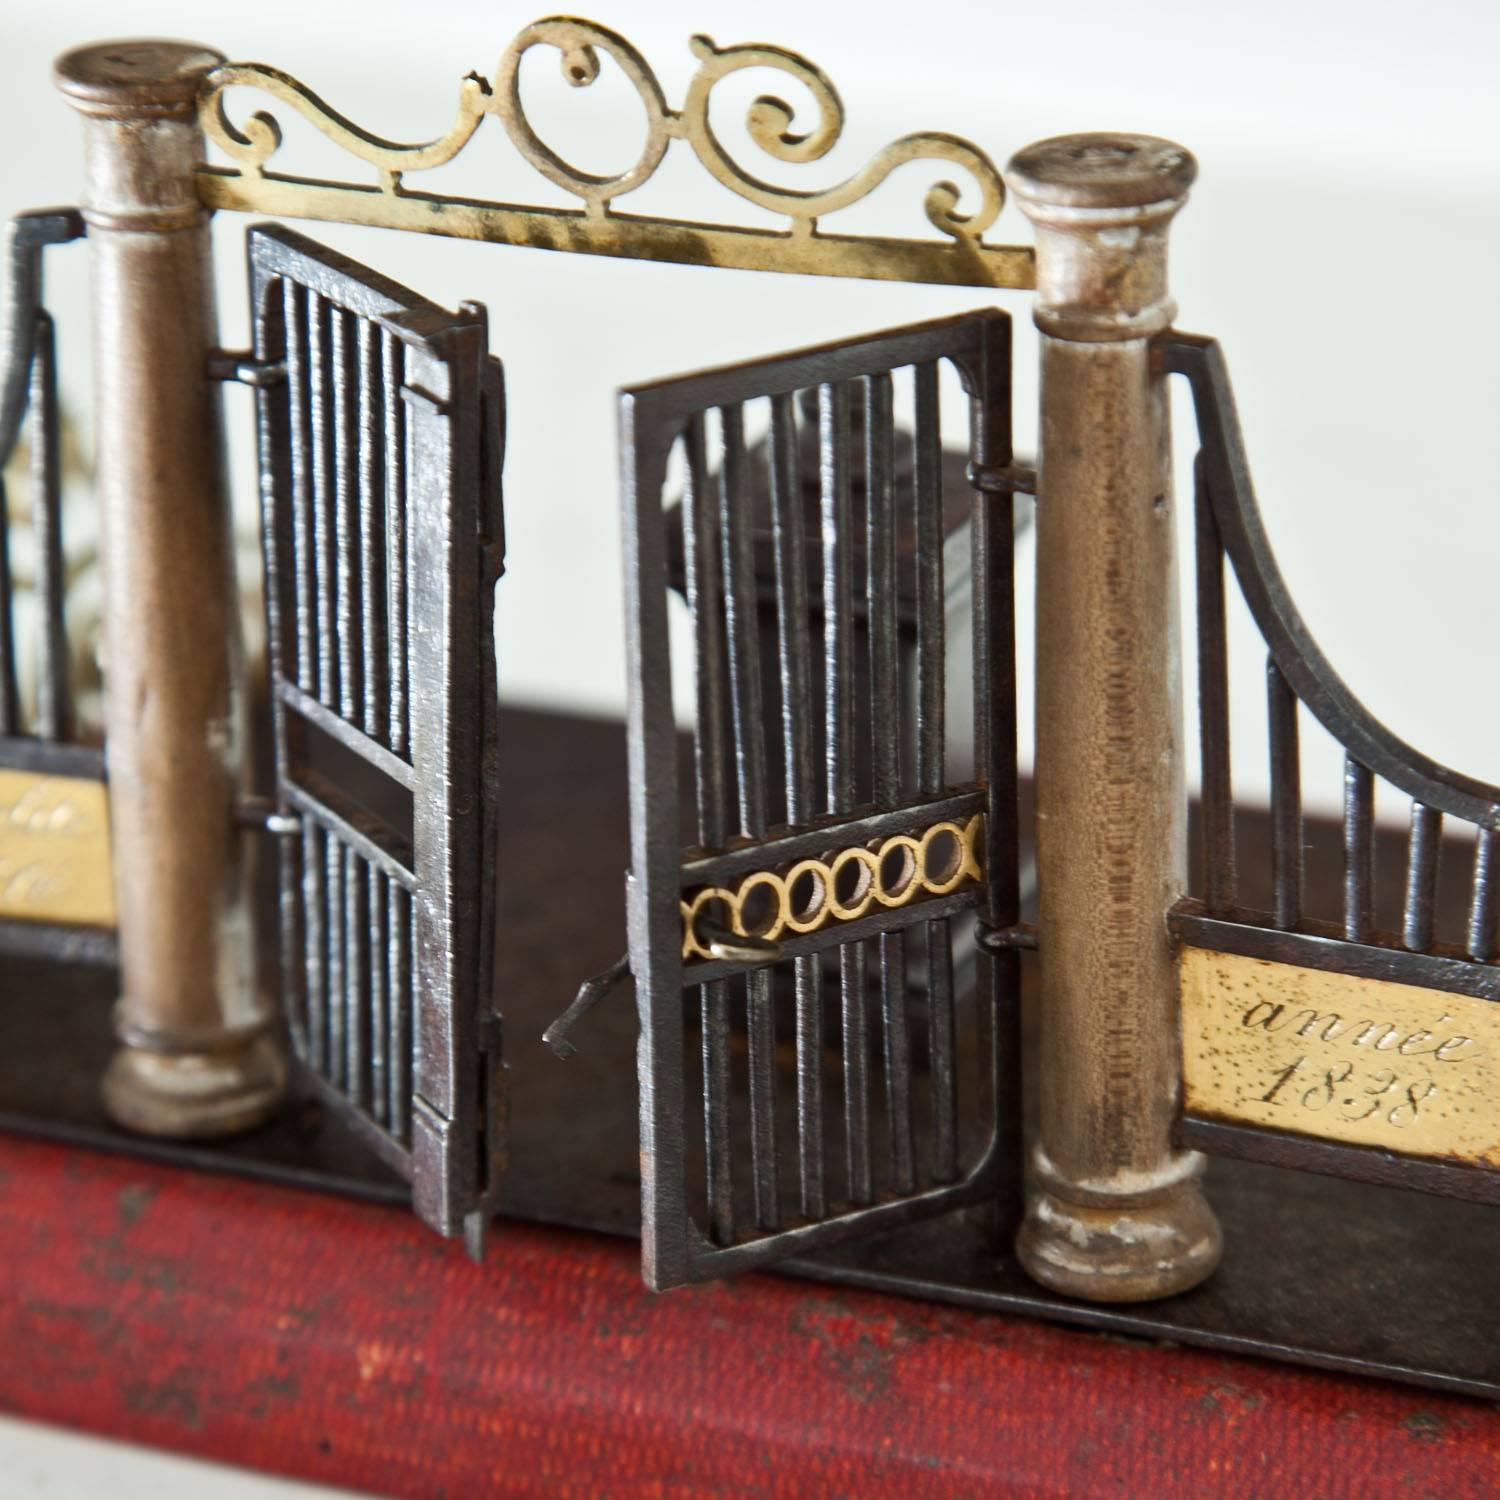 Small model of a gate out of brass and iron with columns and a large double-door. The model is signed Hippolite Barré and dated 1838.